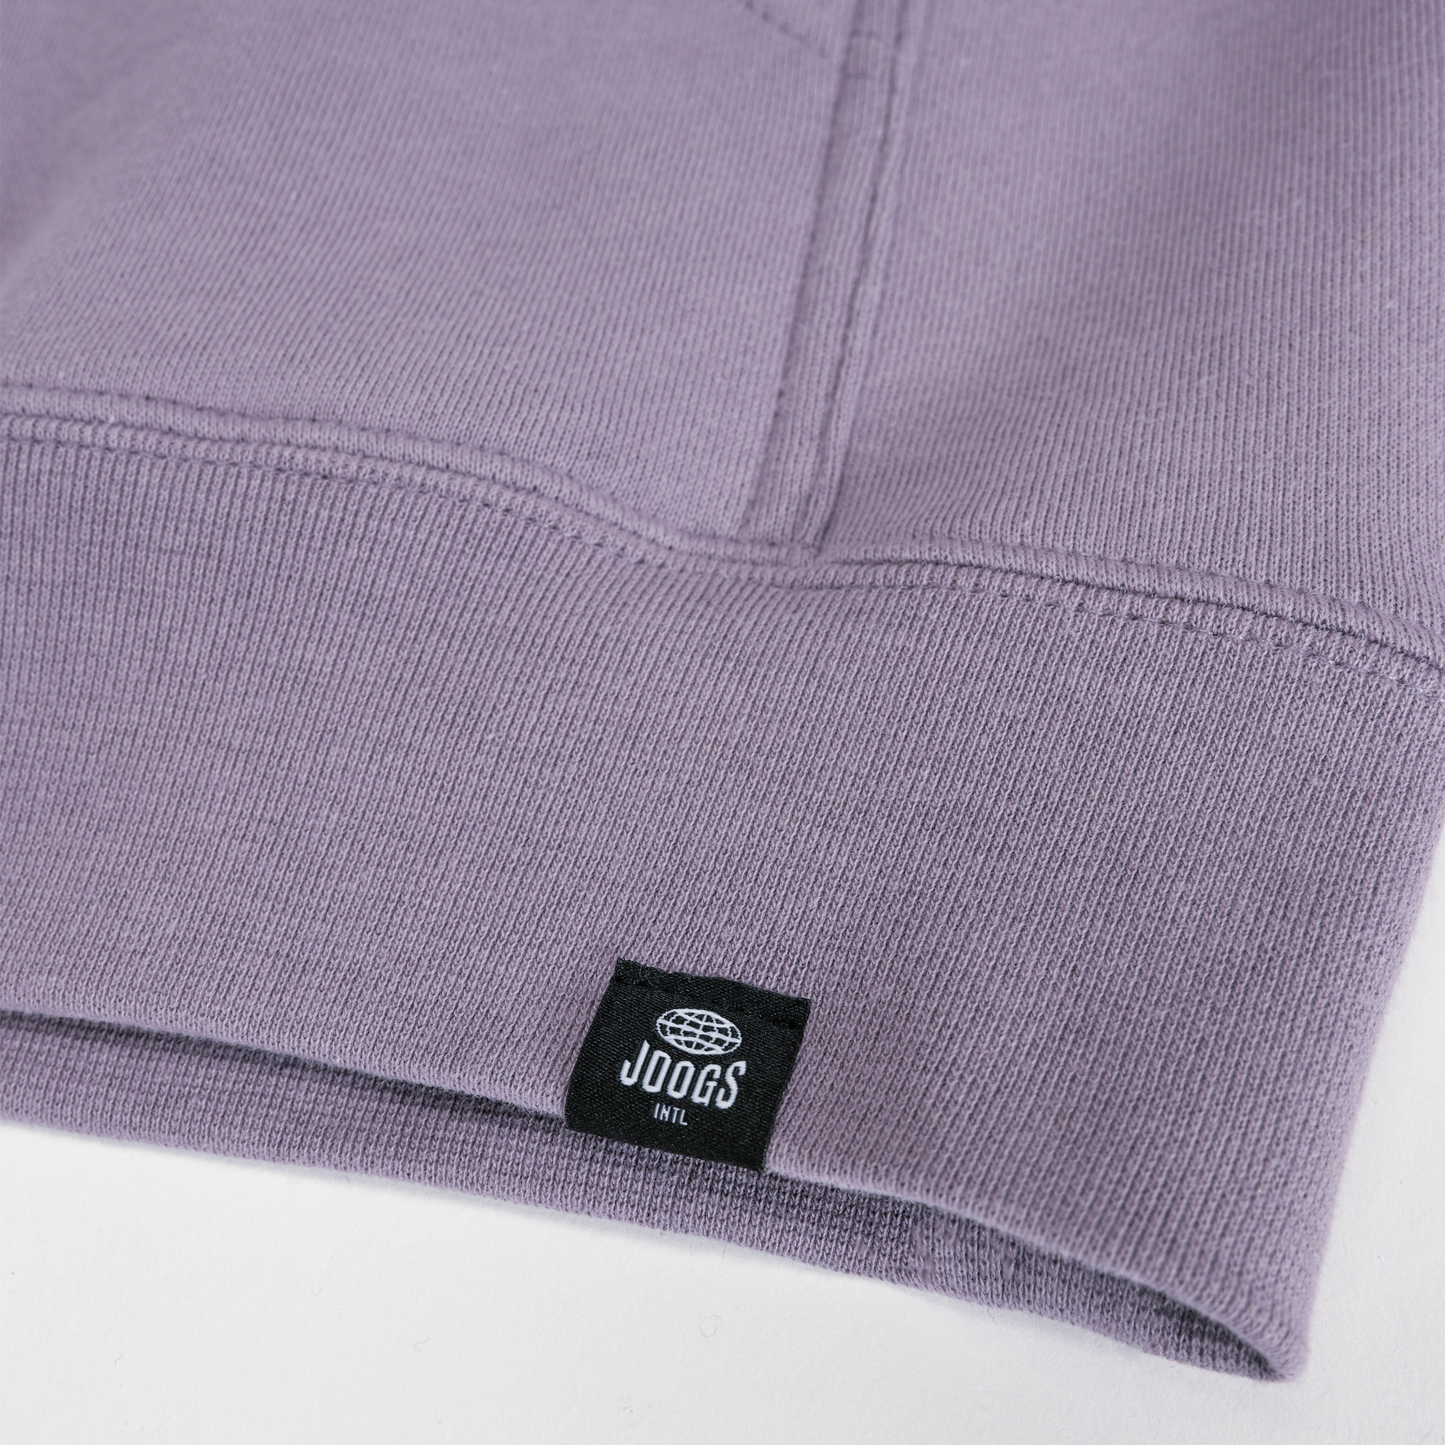 JOOGS EMBROIDERED LOGO HOODIE - DUSTY GRAPE - FRONT PRODUCT SHOT DETAIL 3